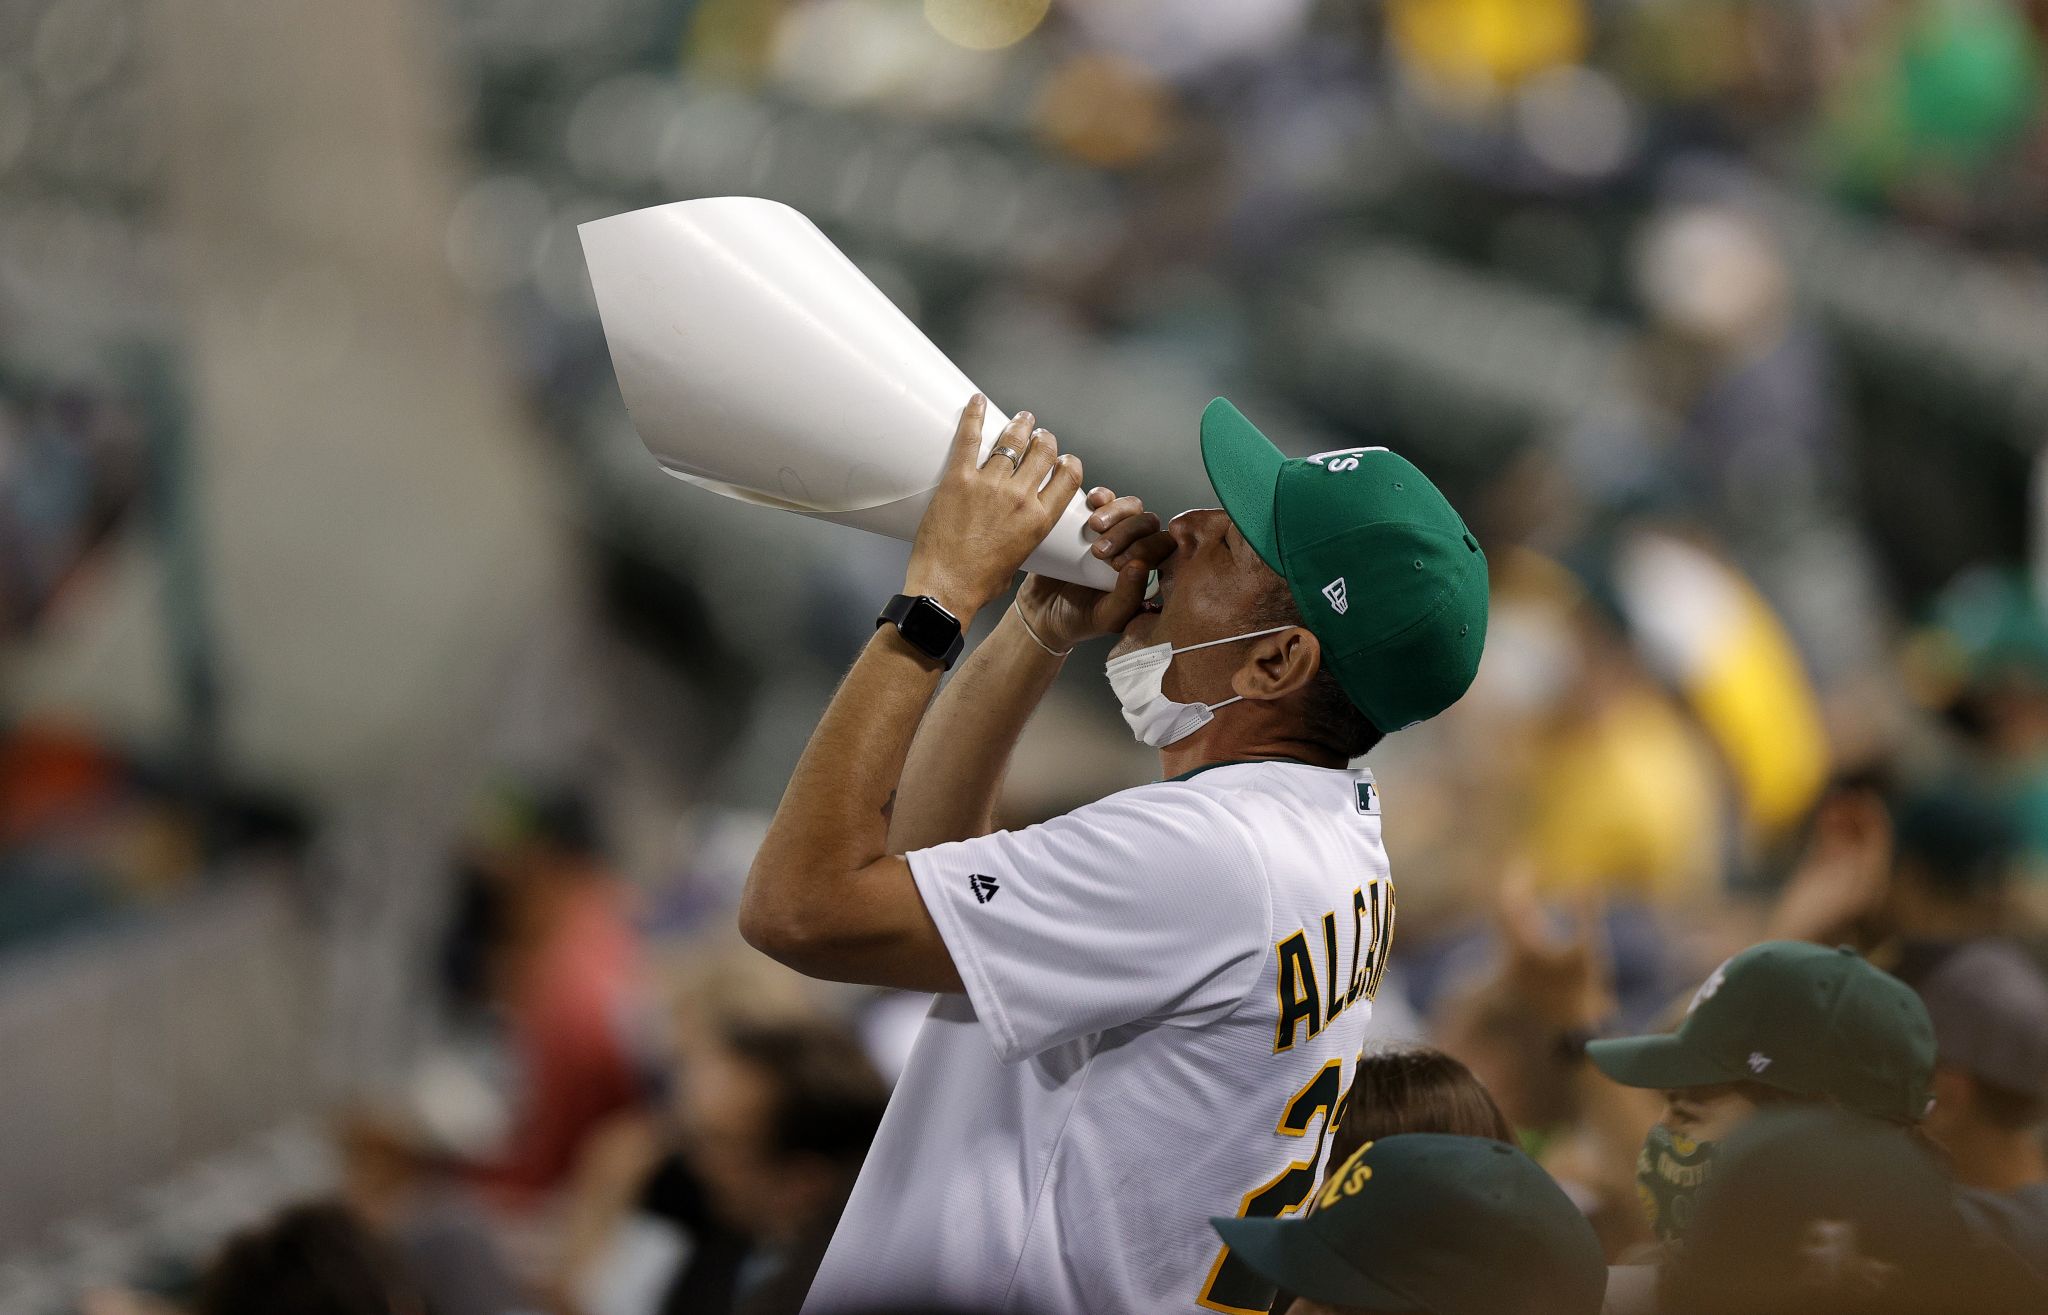 A White Sox Fan is Taunting the Houston Astros With a Megaphone